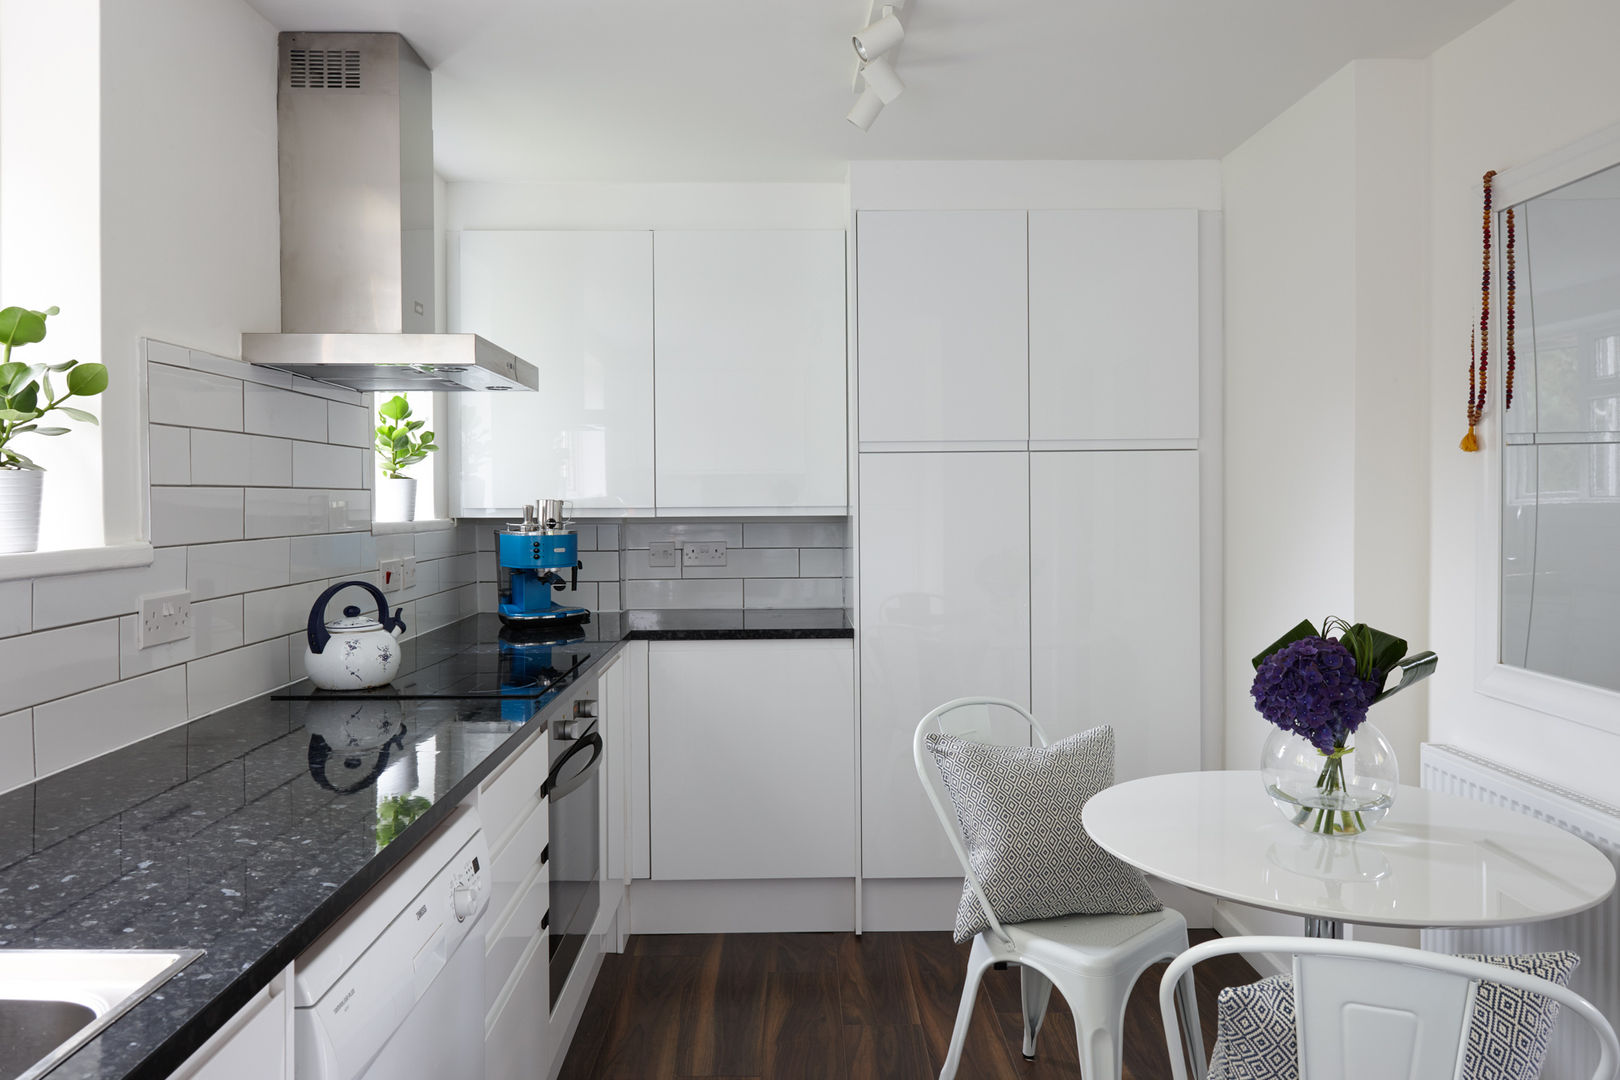 Virginia Water Apartment - Surrey Bhavin Taylor Design Cocinas de estilo moderno kitchen,white,high gloss,blue,black,dining table,dining chairs,kettle,coffee machine,extractor fan